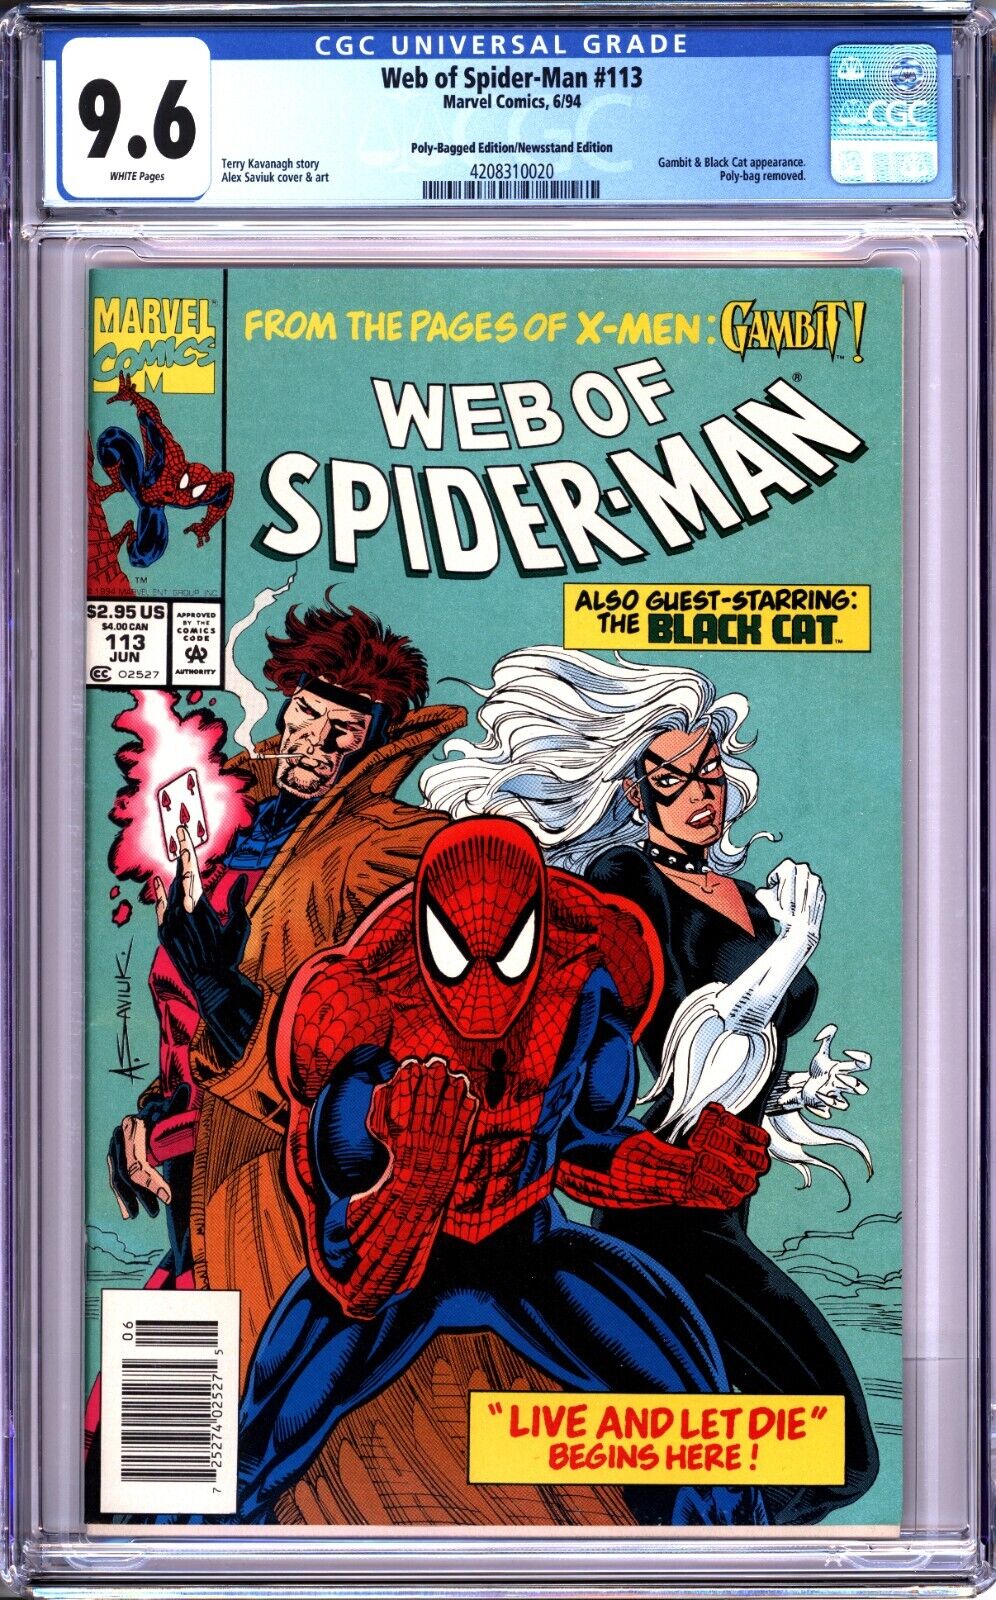 WEB OF SPIDER-MAN #113 CGC 9.6 WP NEWSSTAND - GAMBIT and BLACK CAT COVER